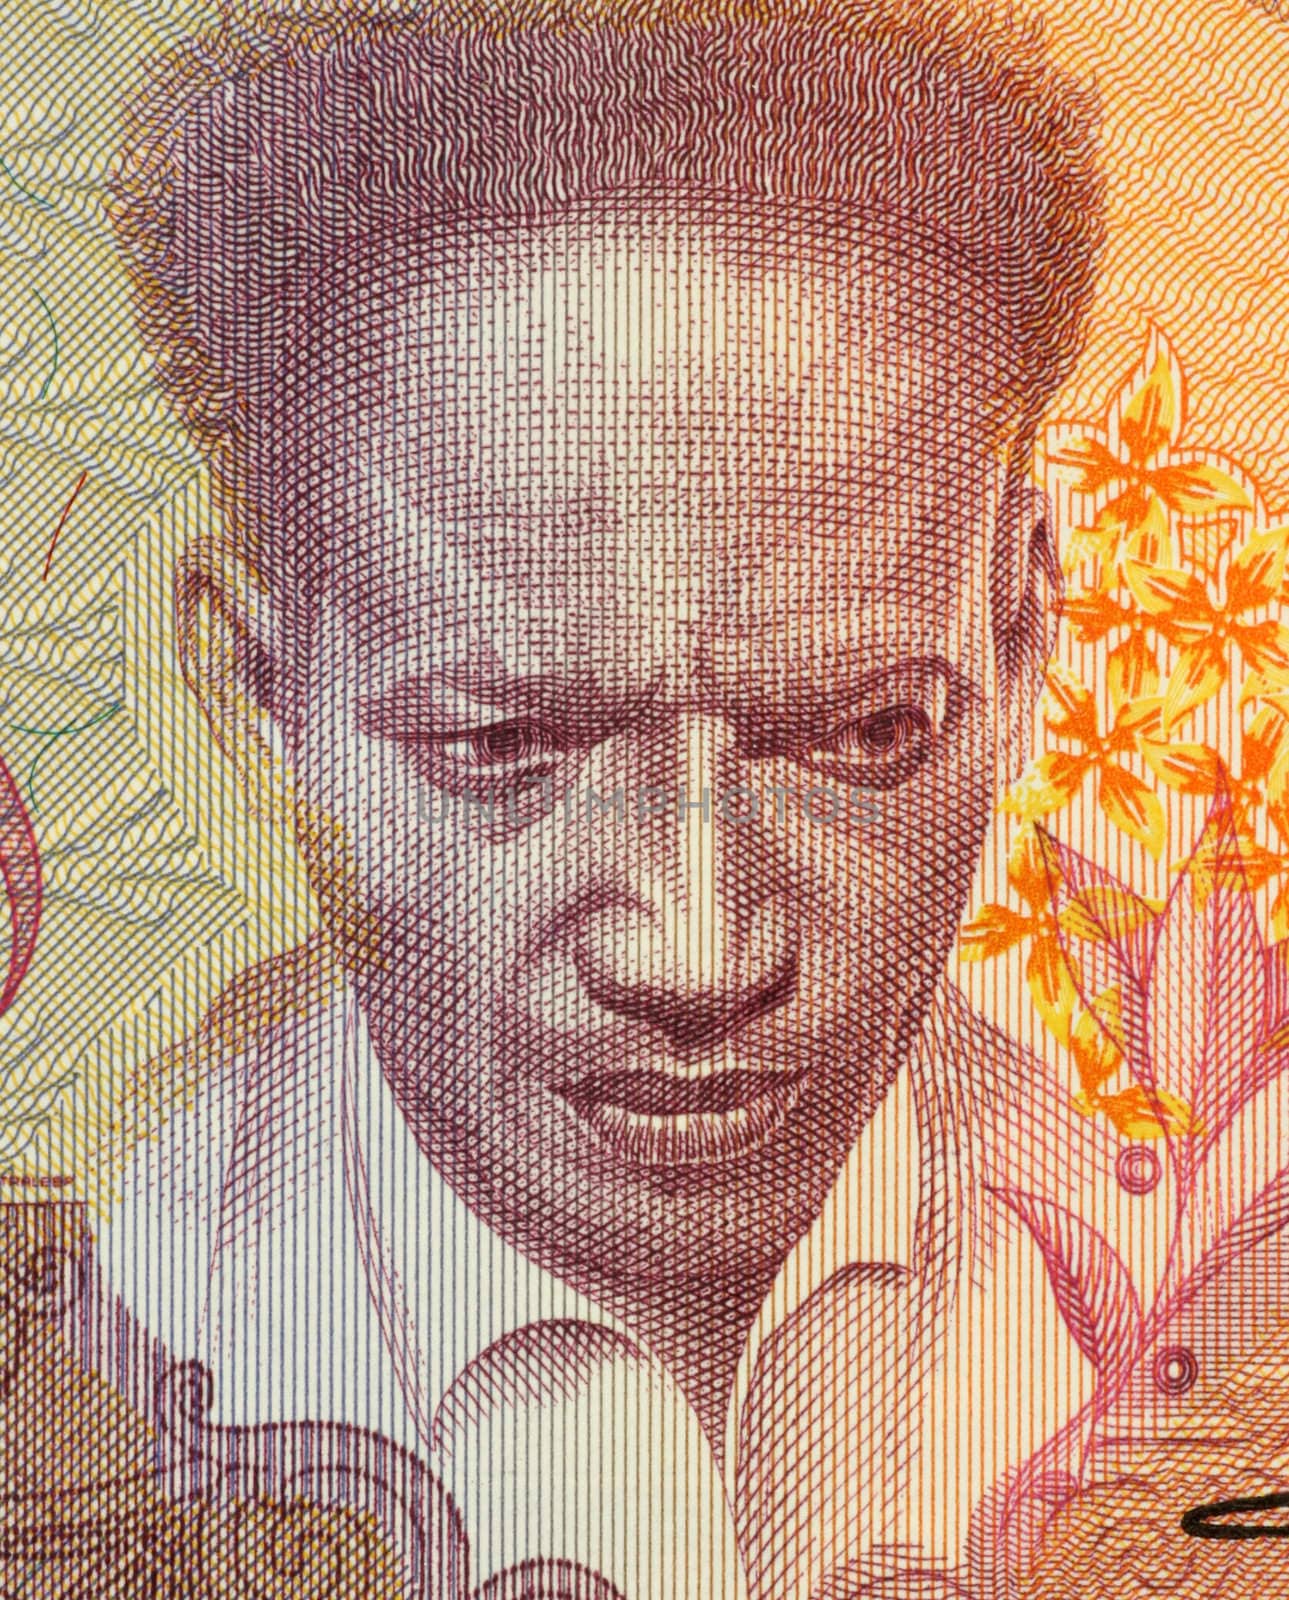 Anton de Kom on 100 Gulden 1988 Banknote from Suriname. Resistance fighter and anti-colonialist author.